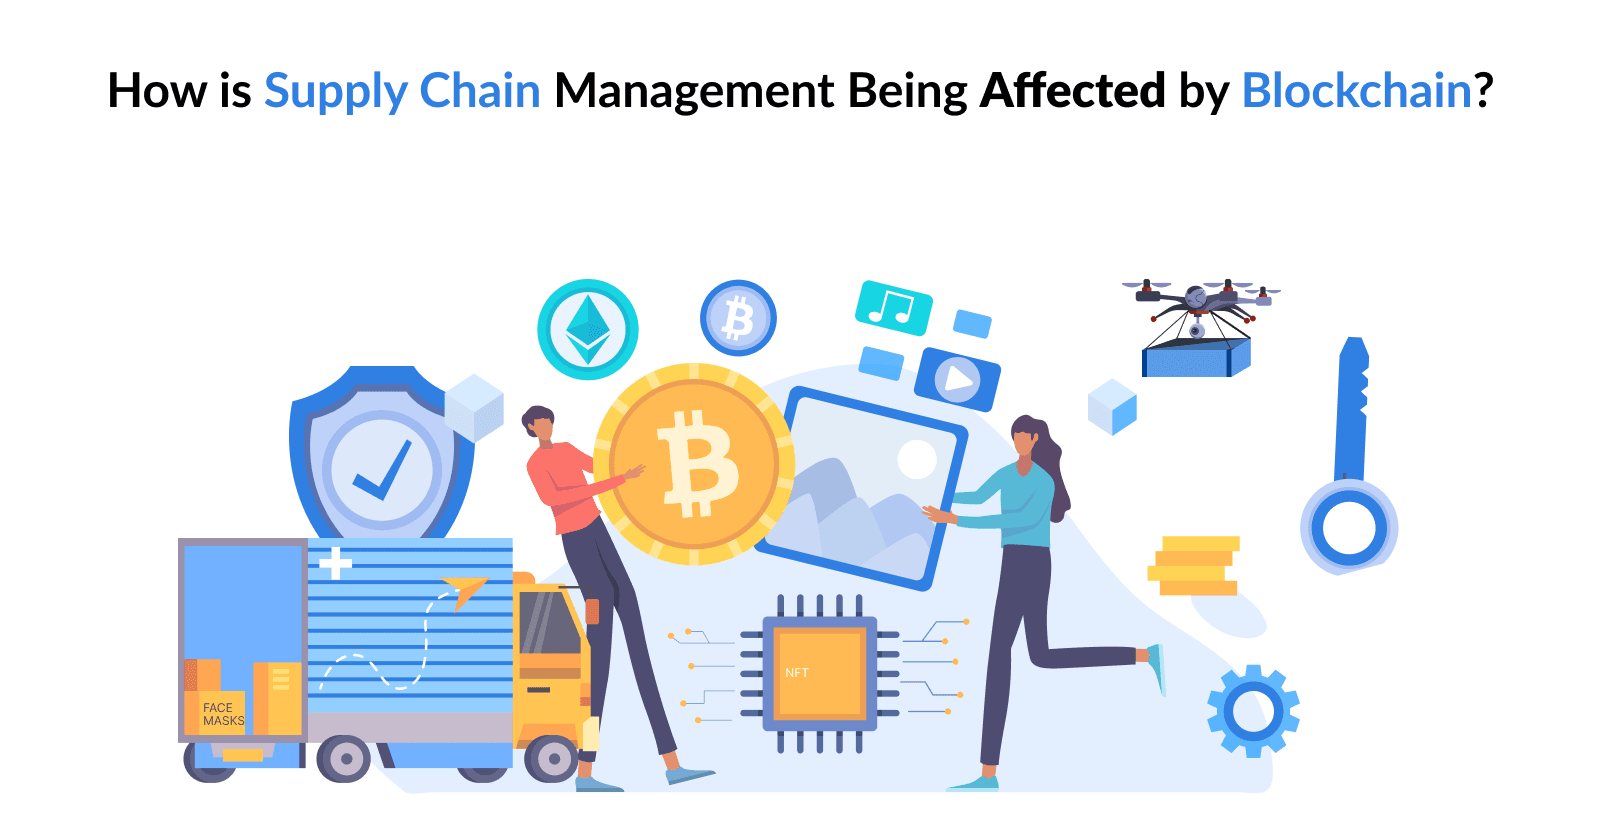 How is Supply Chain Management Being Affected by Blockchain